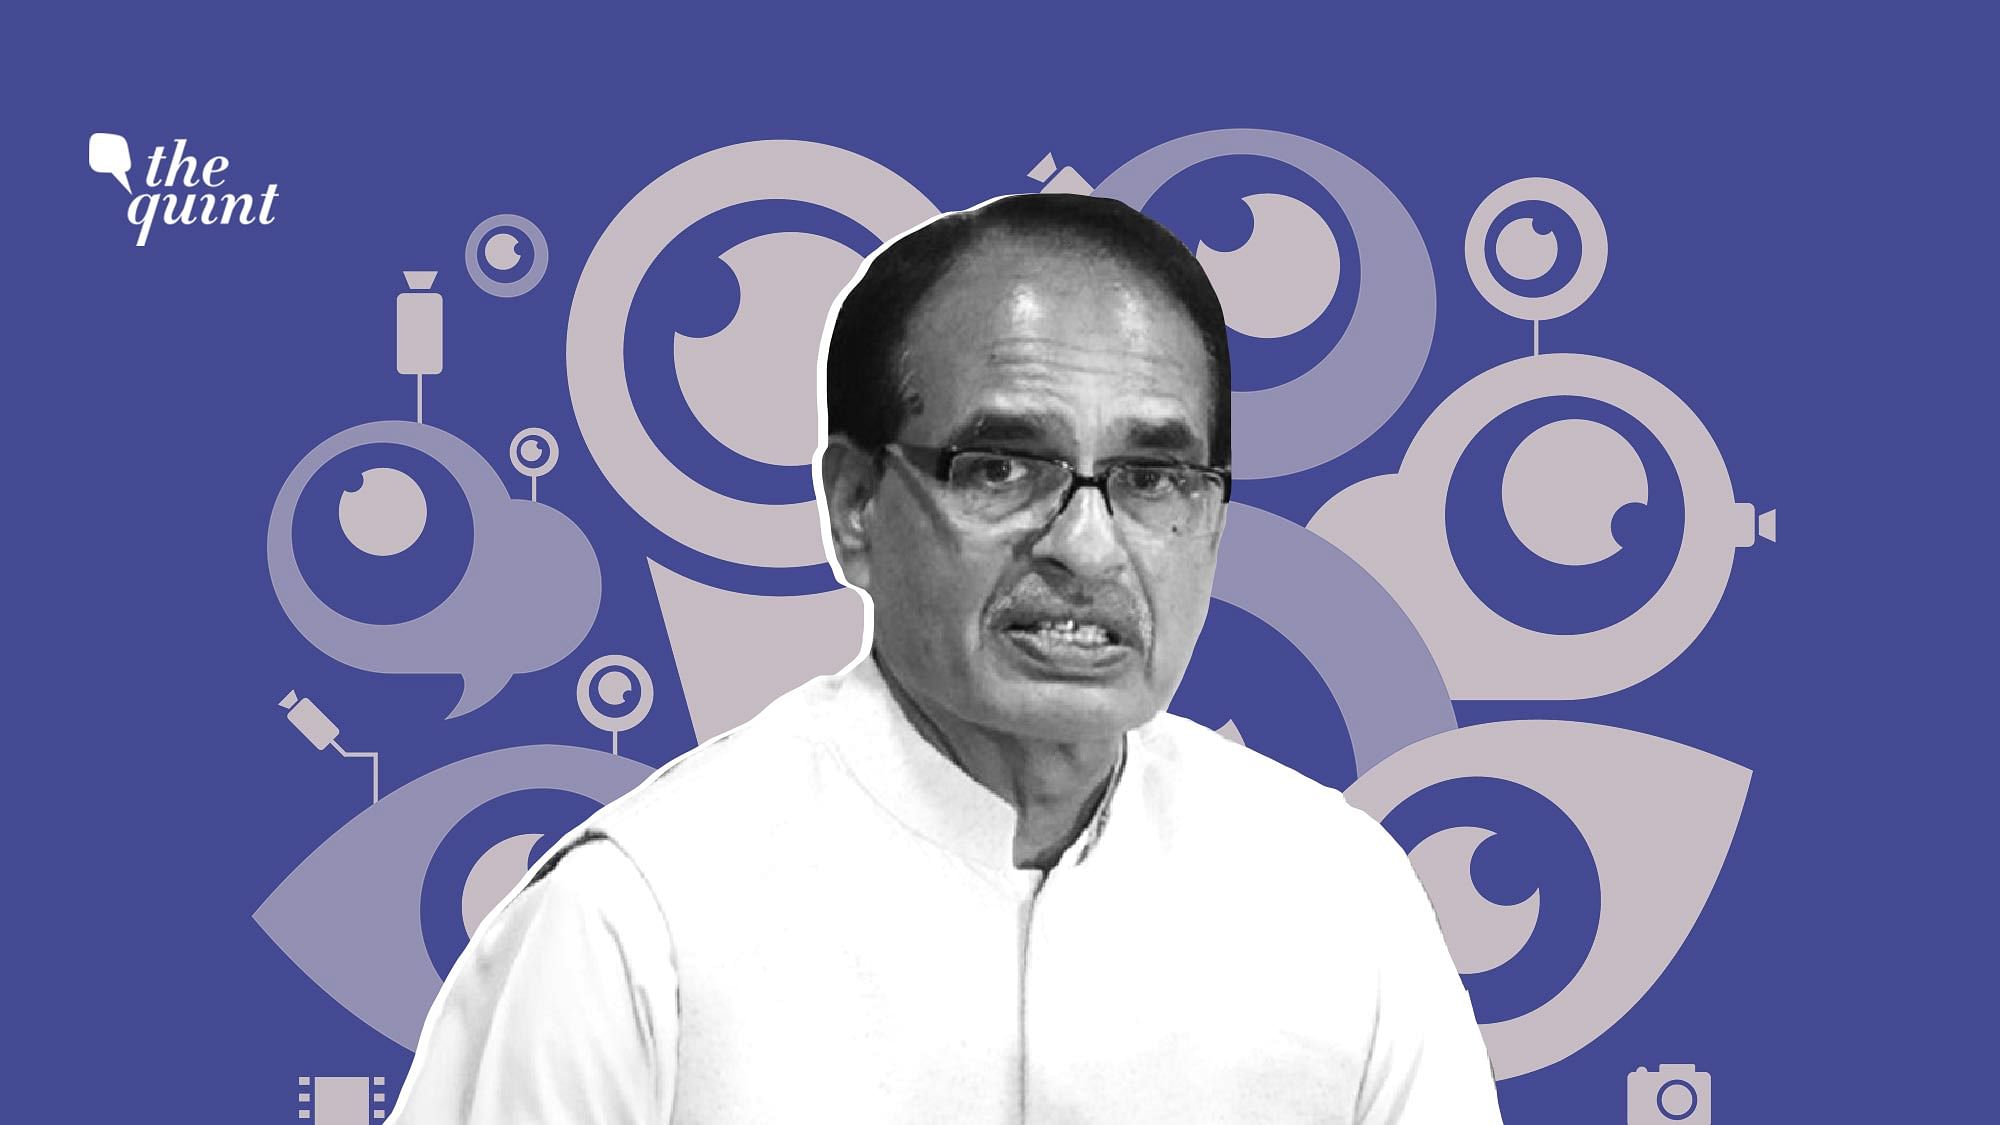 MP Chief Minister Shivraj Singh Chouhan is a worried man these days, with many believing he’s under Modi-Shah’s scanner. Image used for representation.